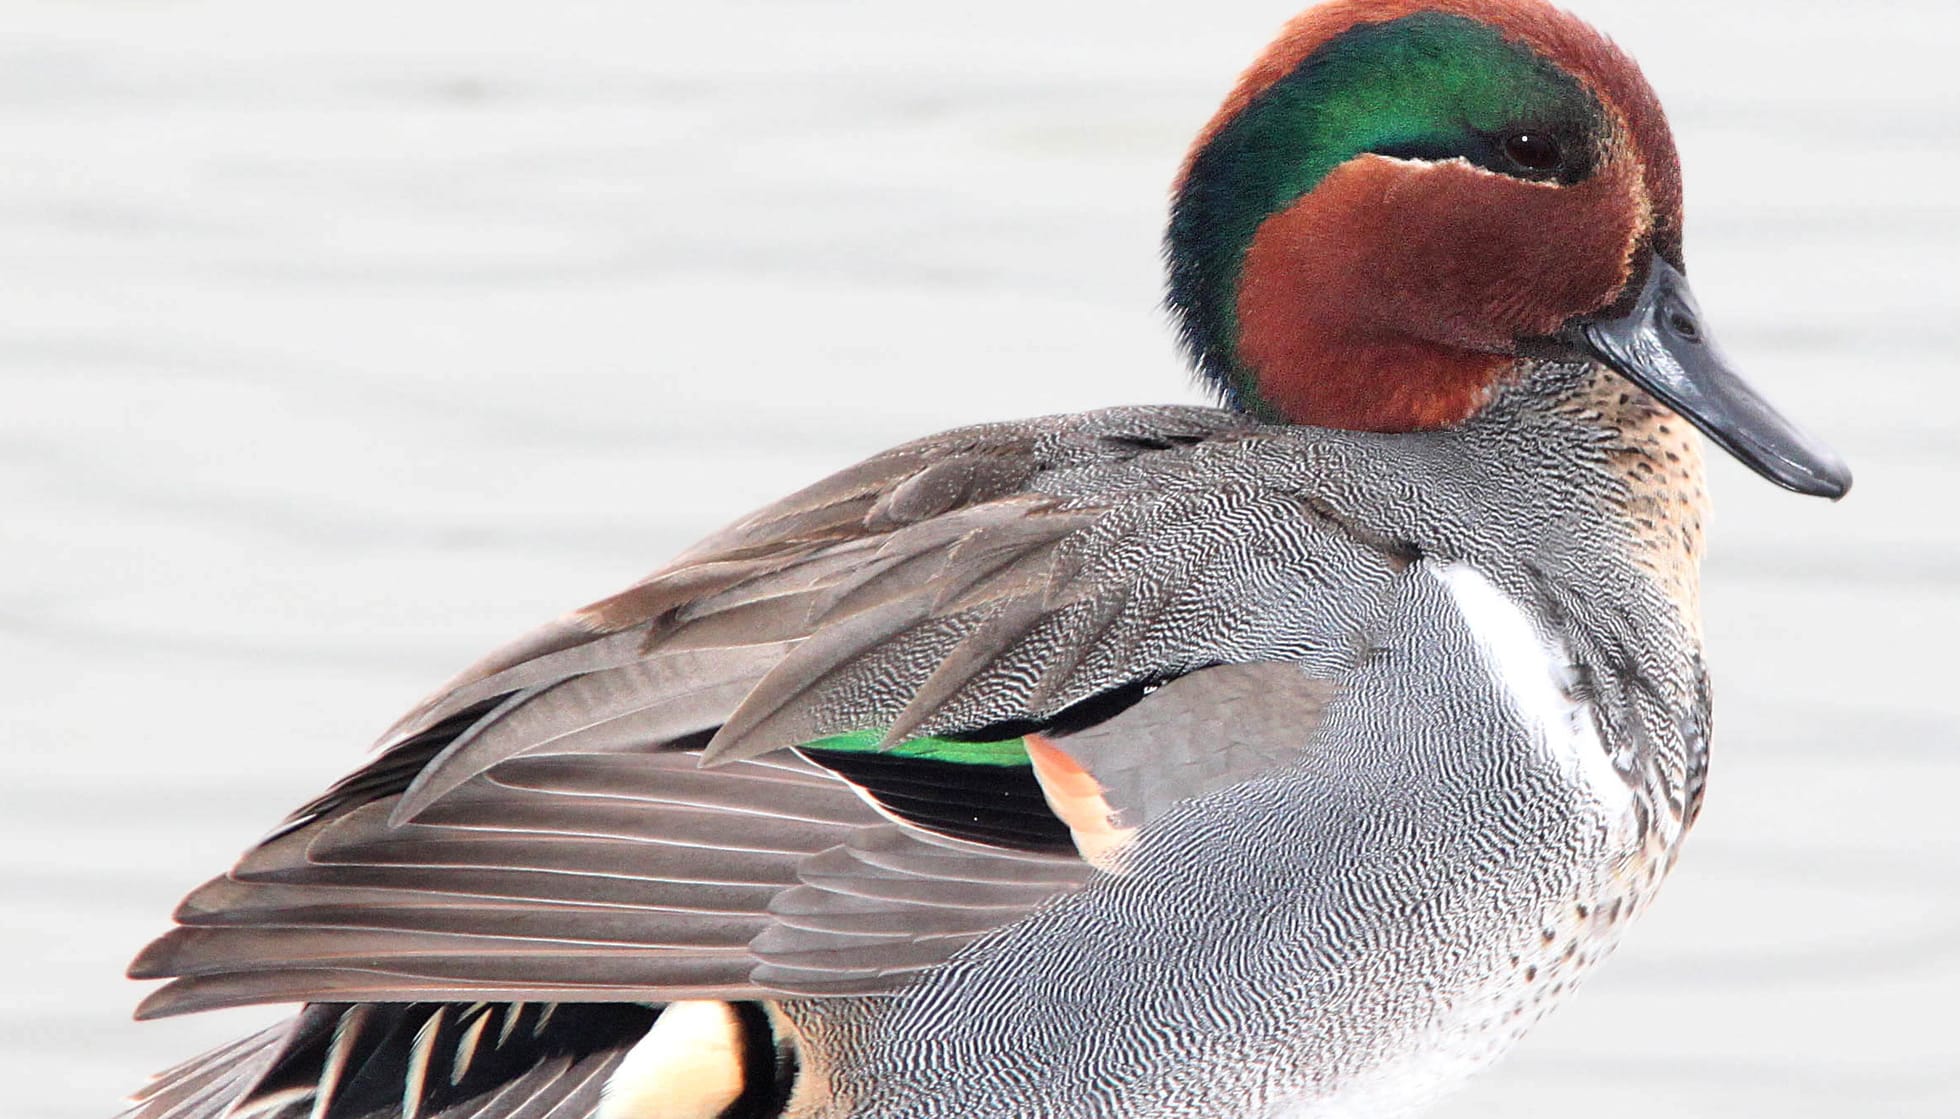 Duck lovers will like to read the green-winged teal facts.